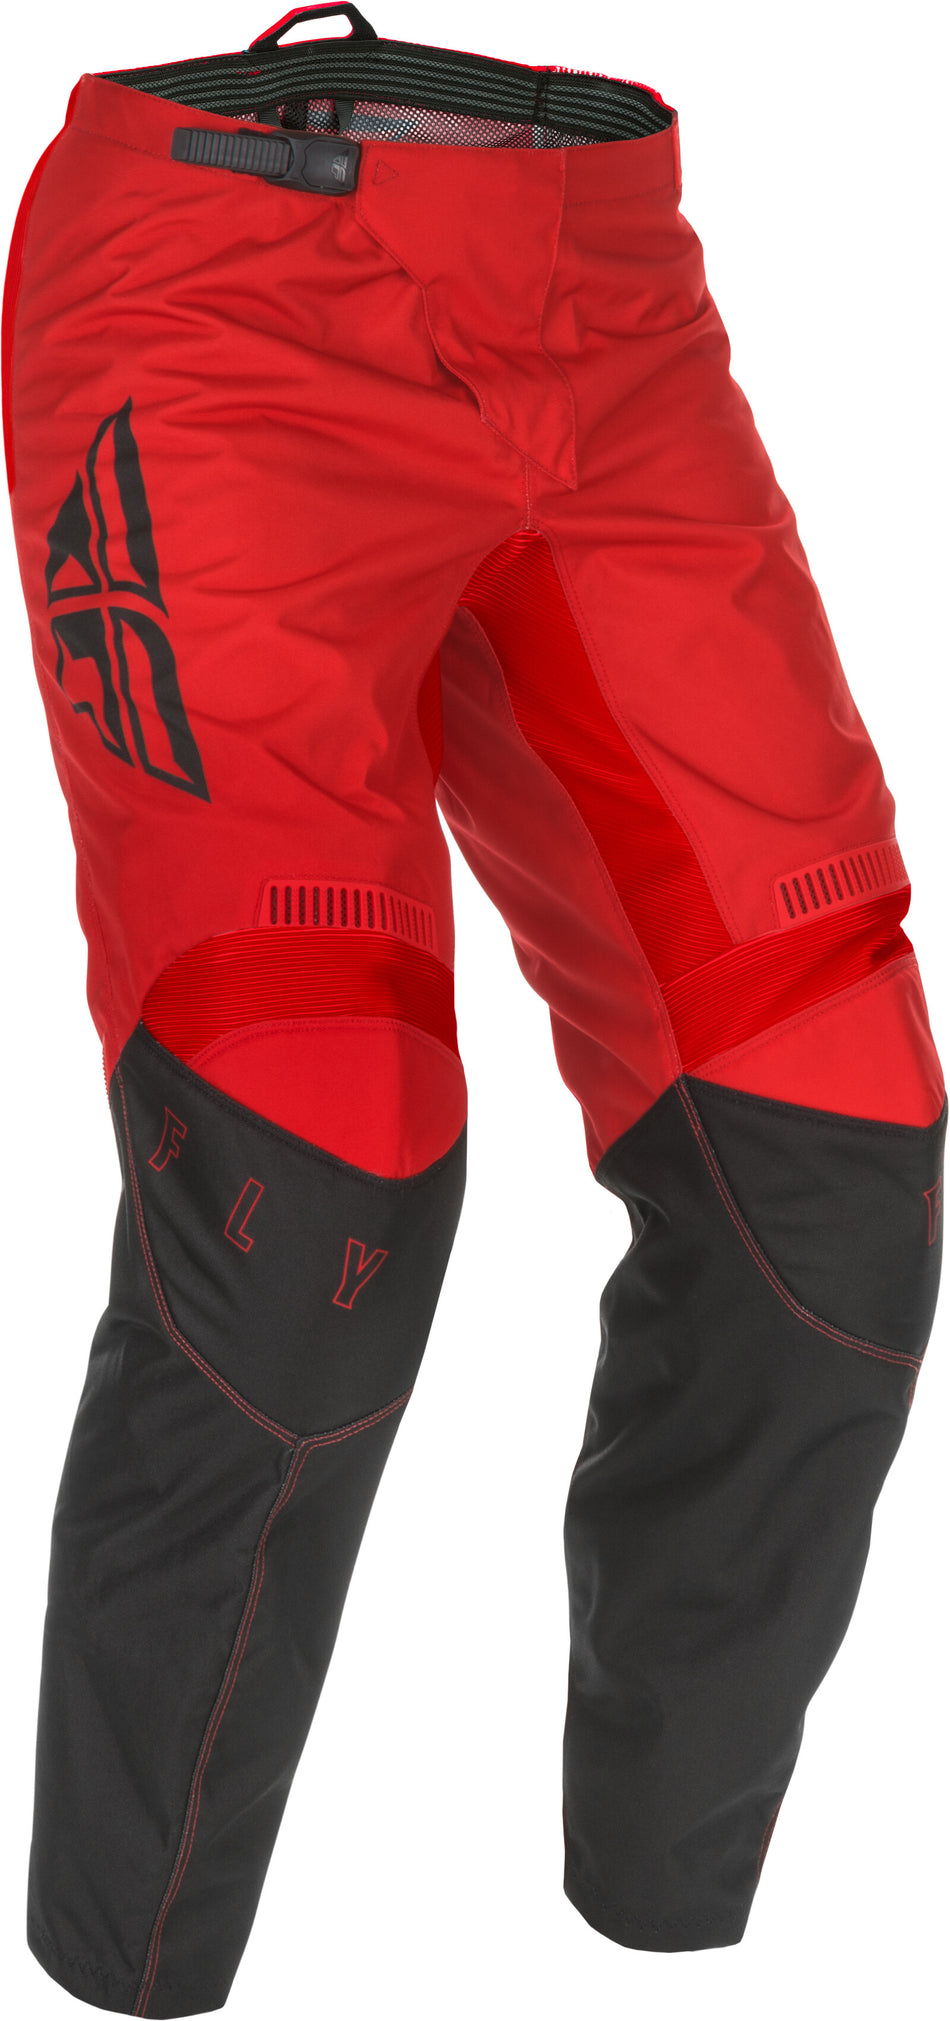 FLY RACING Youth F-16 Pants Red/Black Sz 24 374-93224